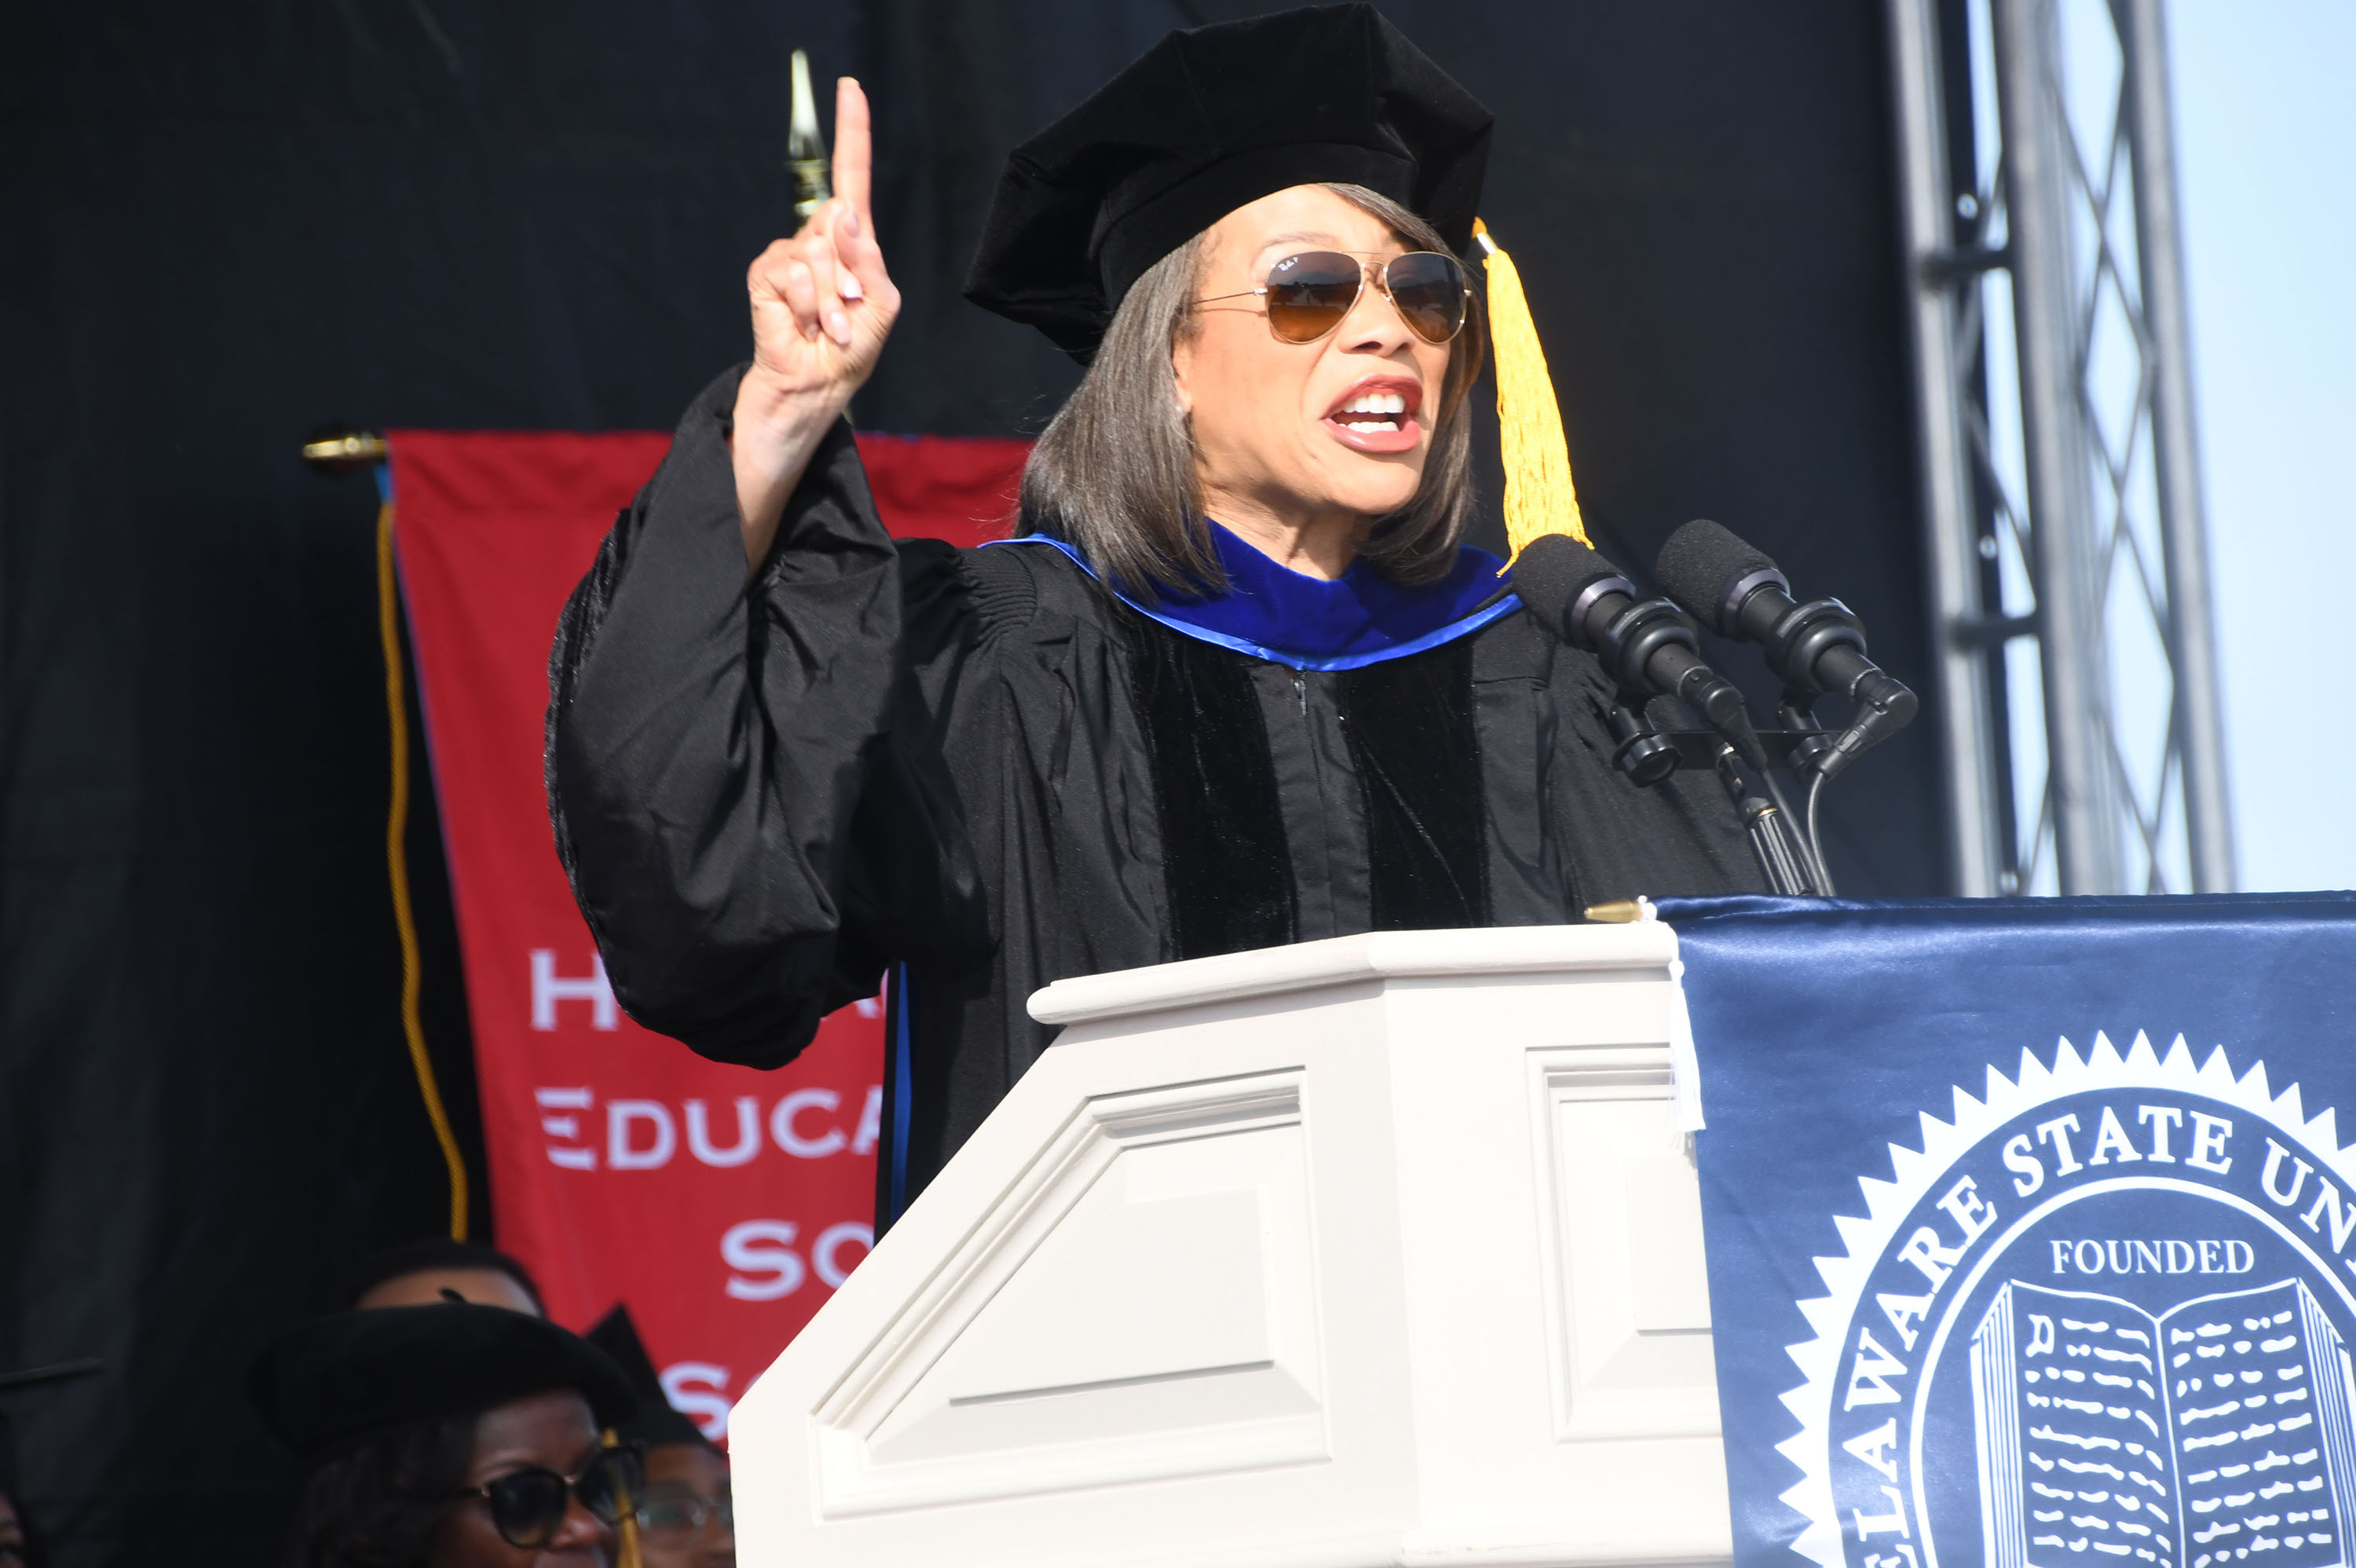 Congresswoman Lisa Blunt Rochester gave one of the most powerful Commencement addresses in recent University history